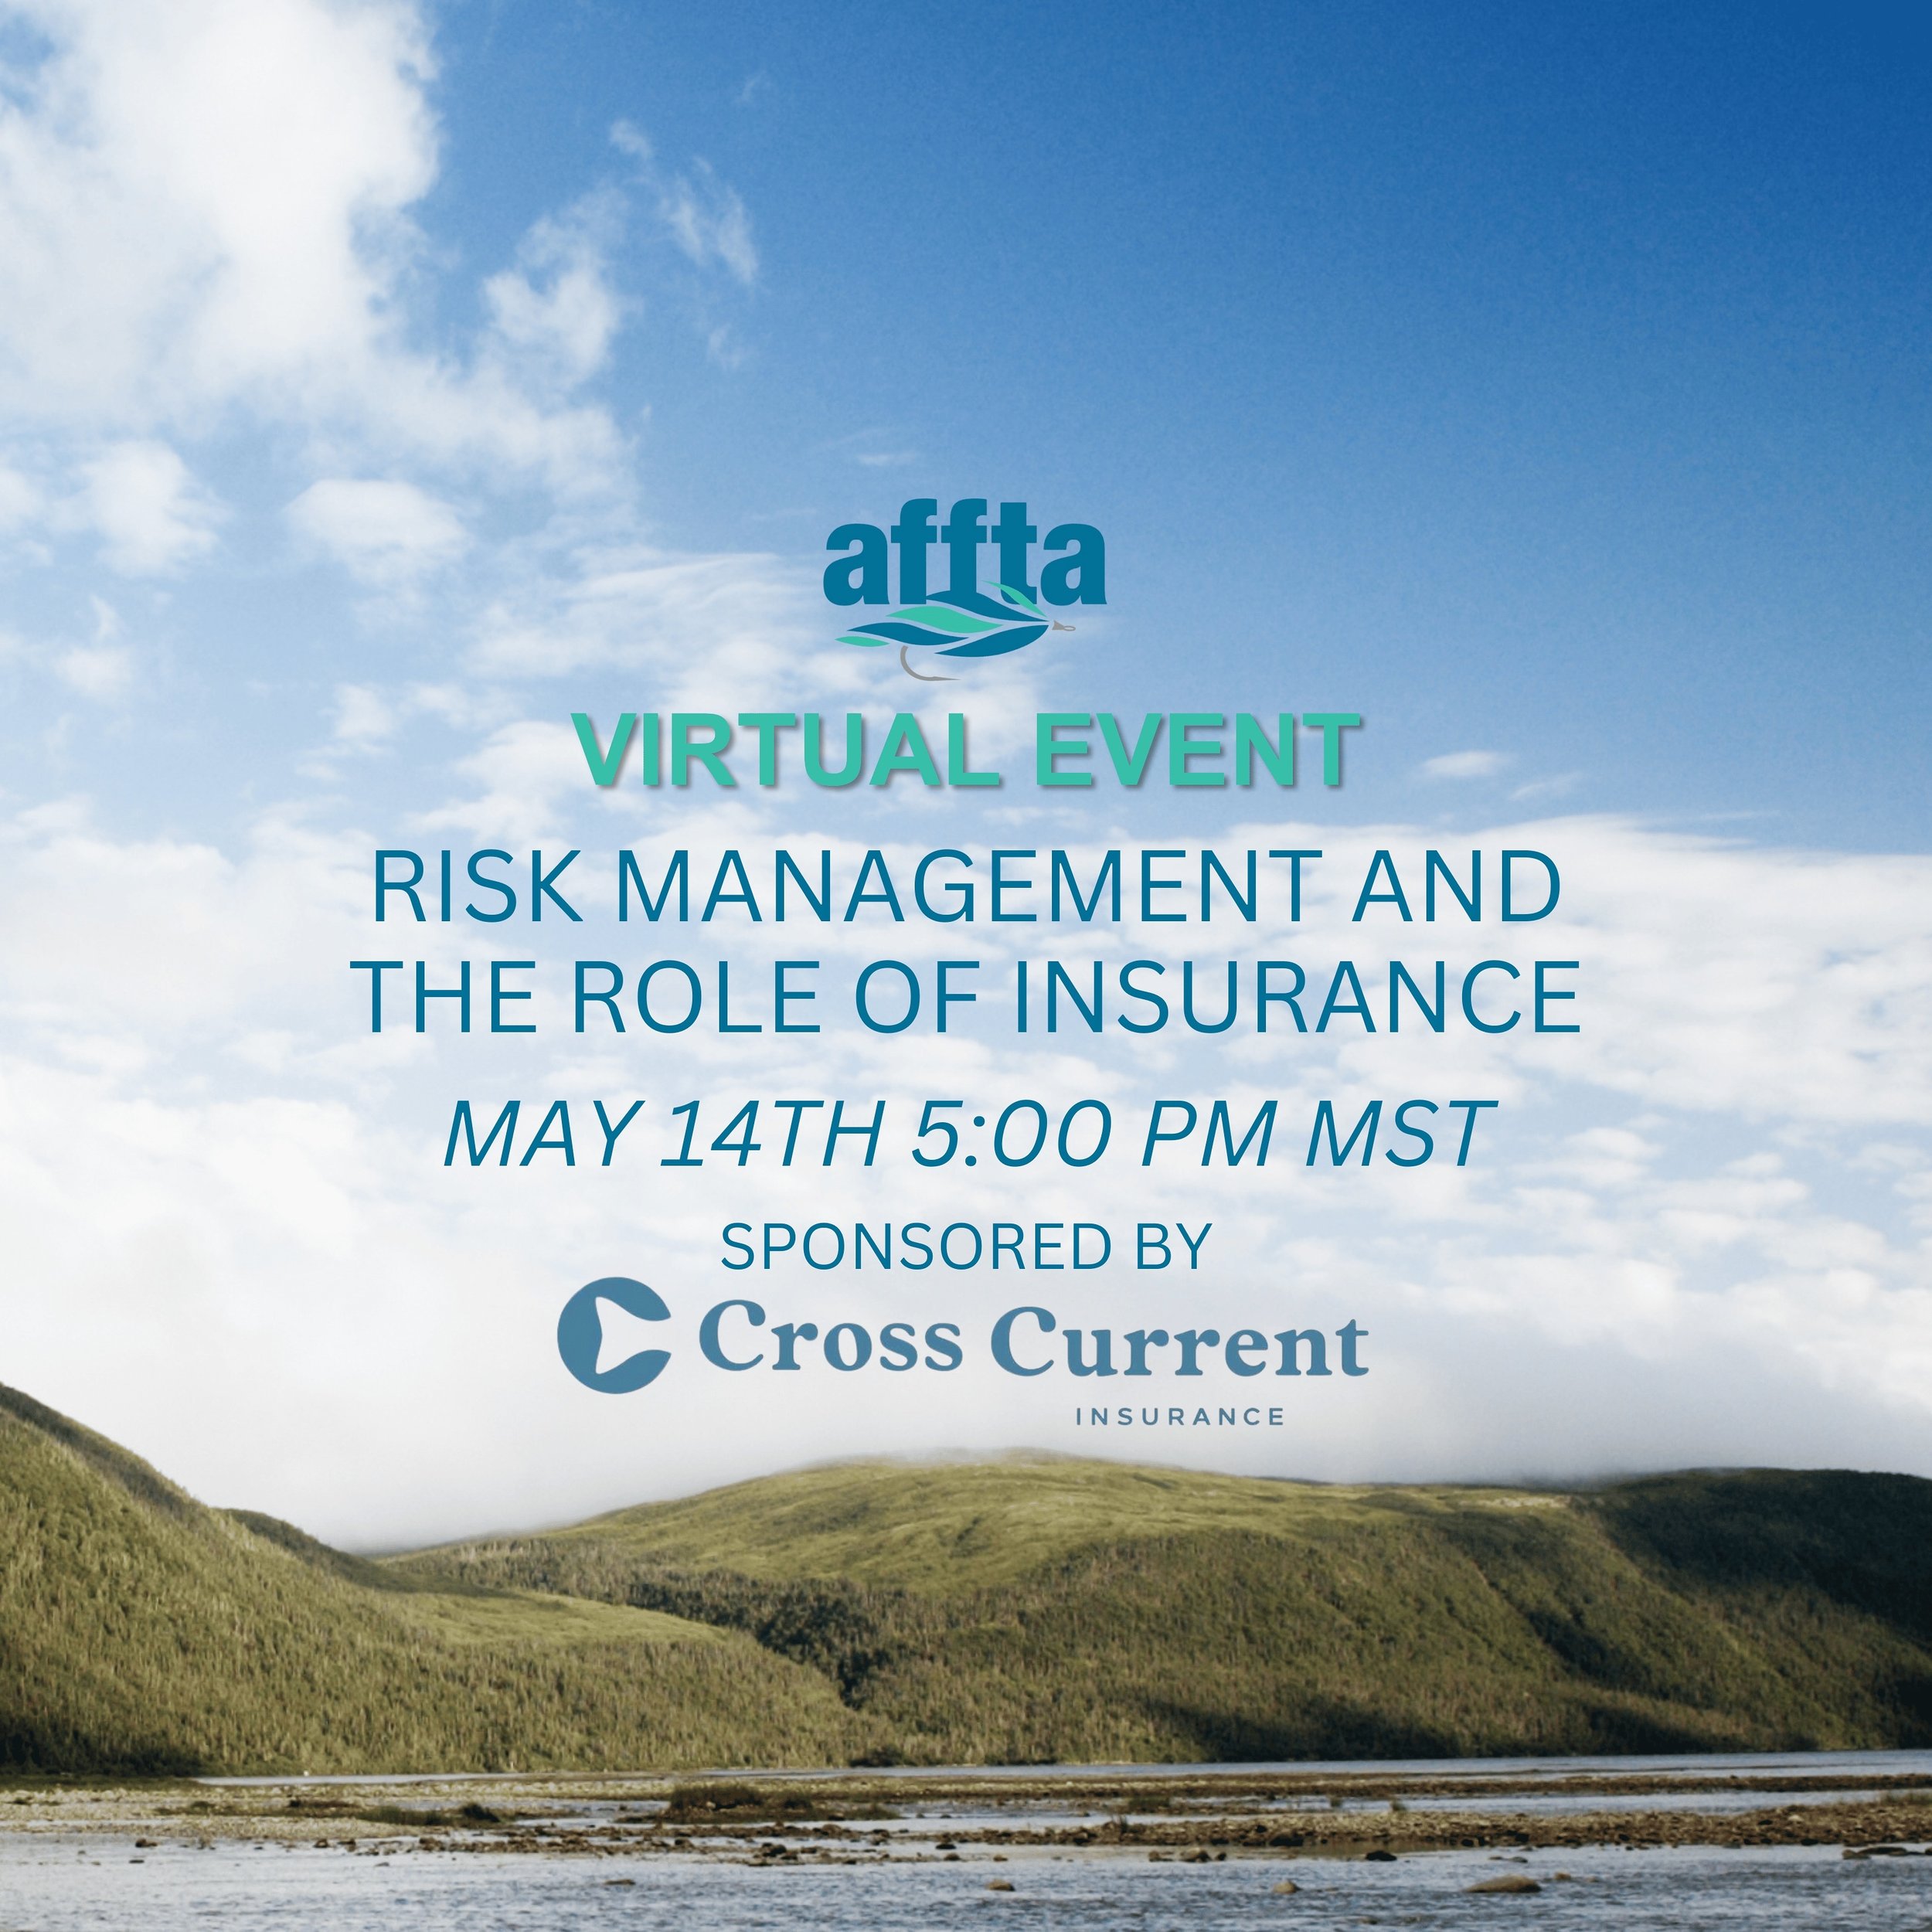 *Reminder* Don&rsquo;t miss out on the opportunity to learn more about risk management and the role of insurance! Join us for a members-only virtual event next Tuesday, May 14th from 5:00 PM - 6:00 PM MST sponsored by Cross Current Insurance.

Presen